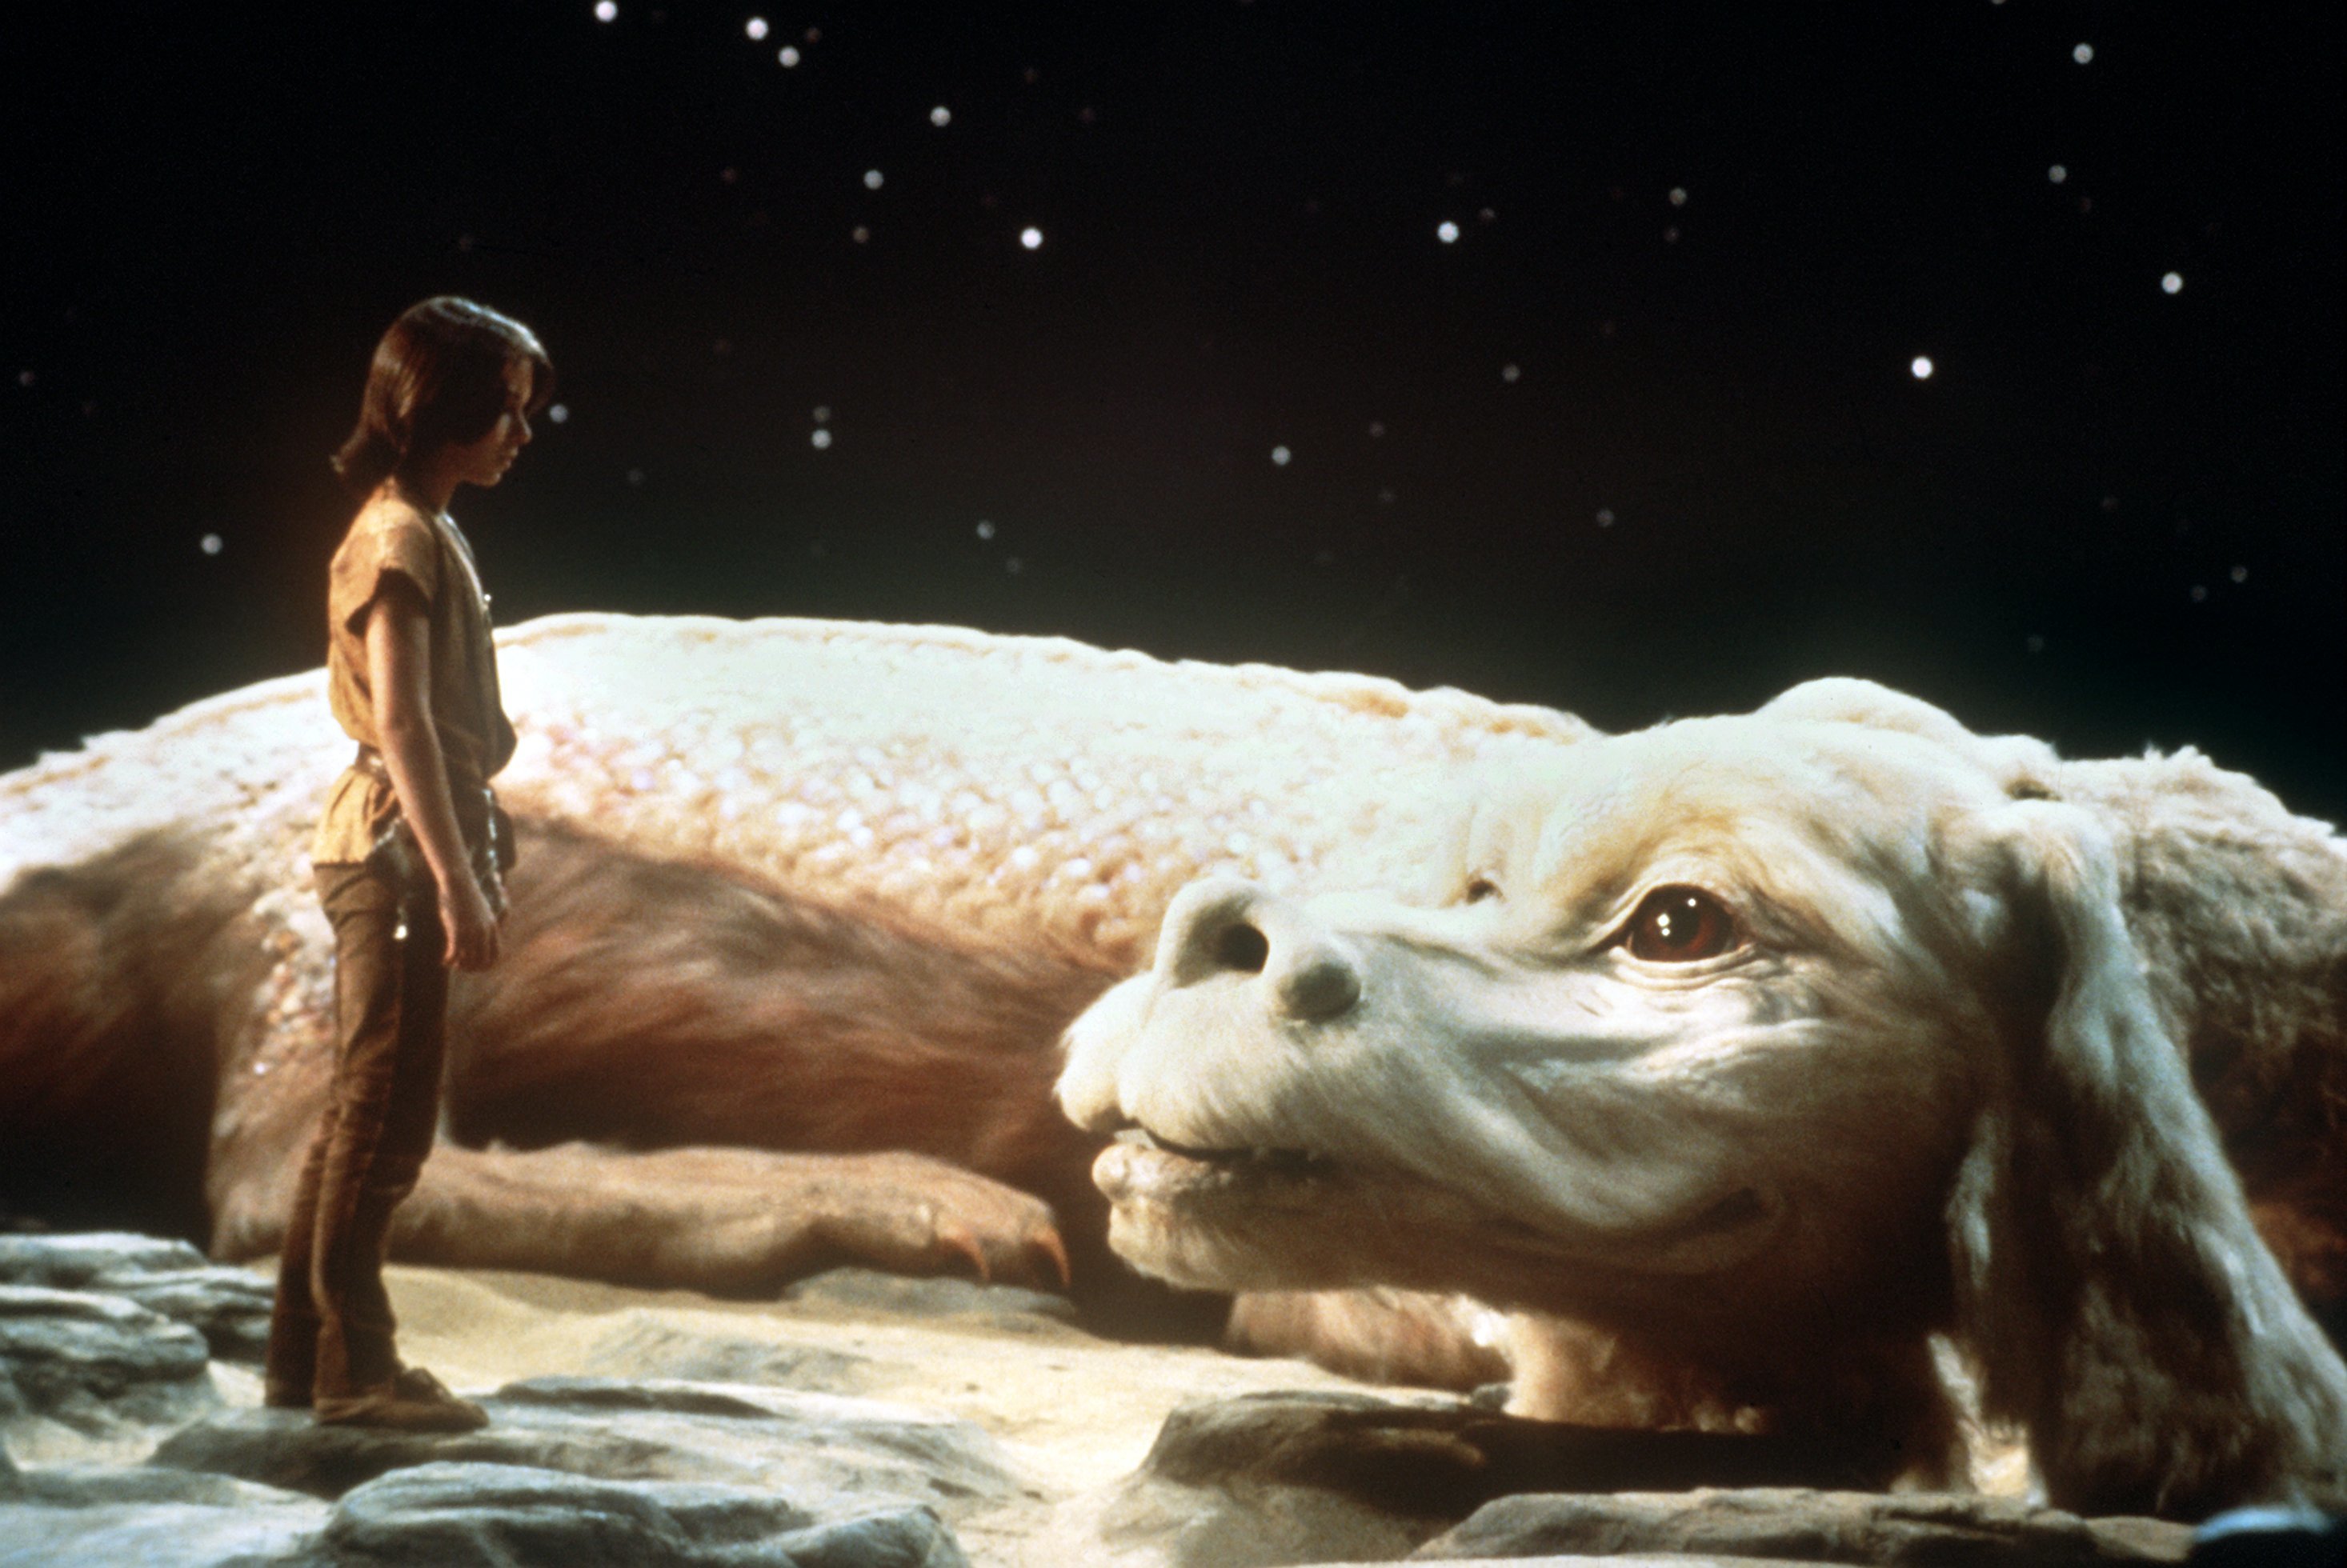 Noah Hathaway as "Atreju" in the 1983 film, "The Neverending Story" on November 30, 1982 | Source: Getty Images